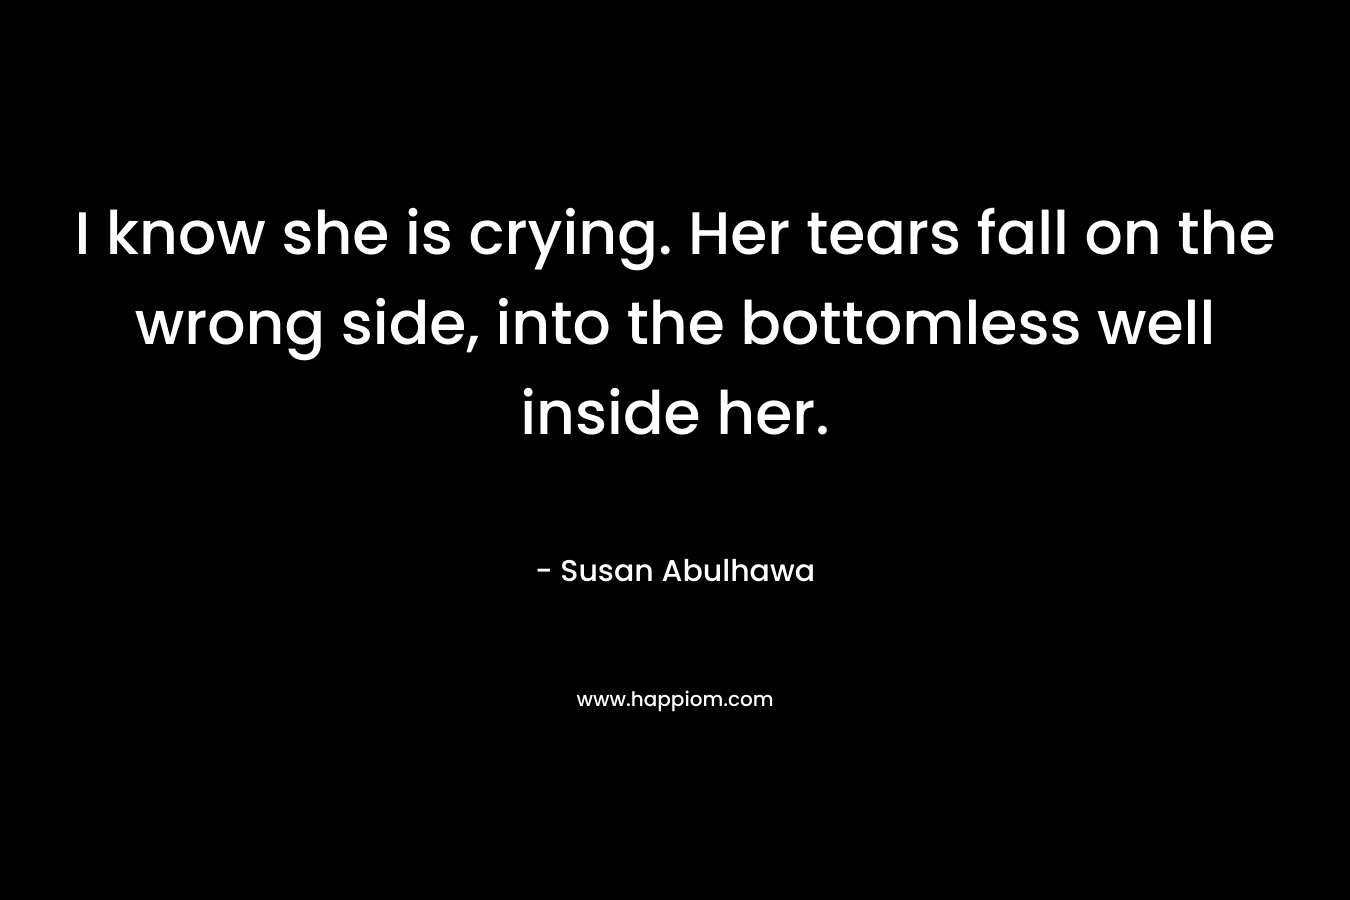 I know she is crying. Her tears fall on the wrong side, into the bottomless well inside her.